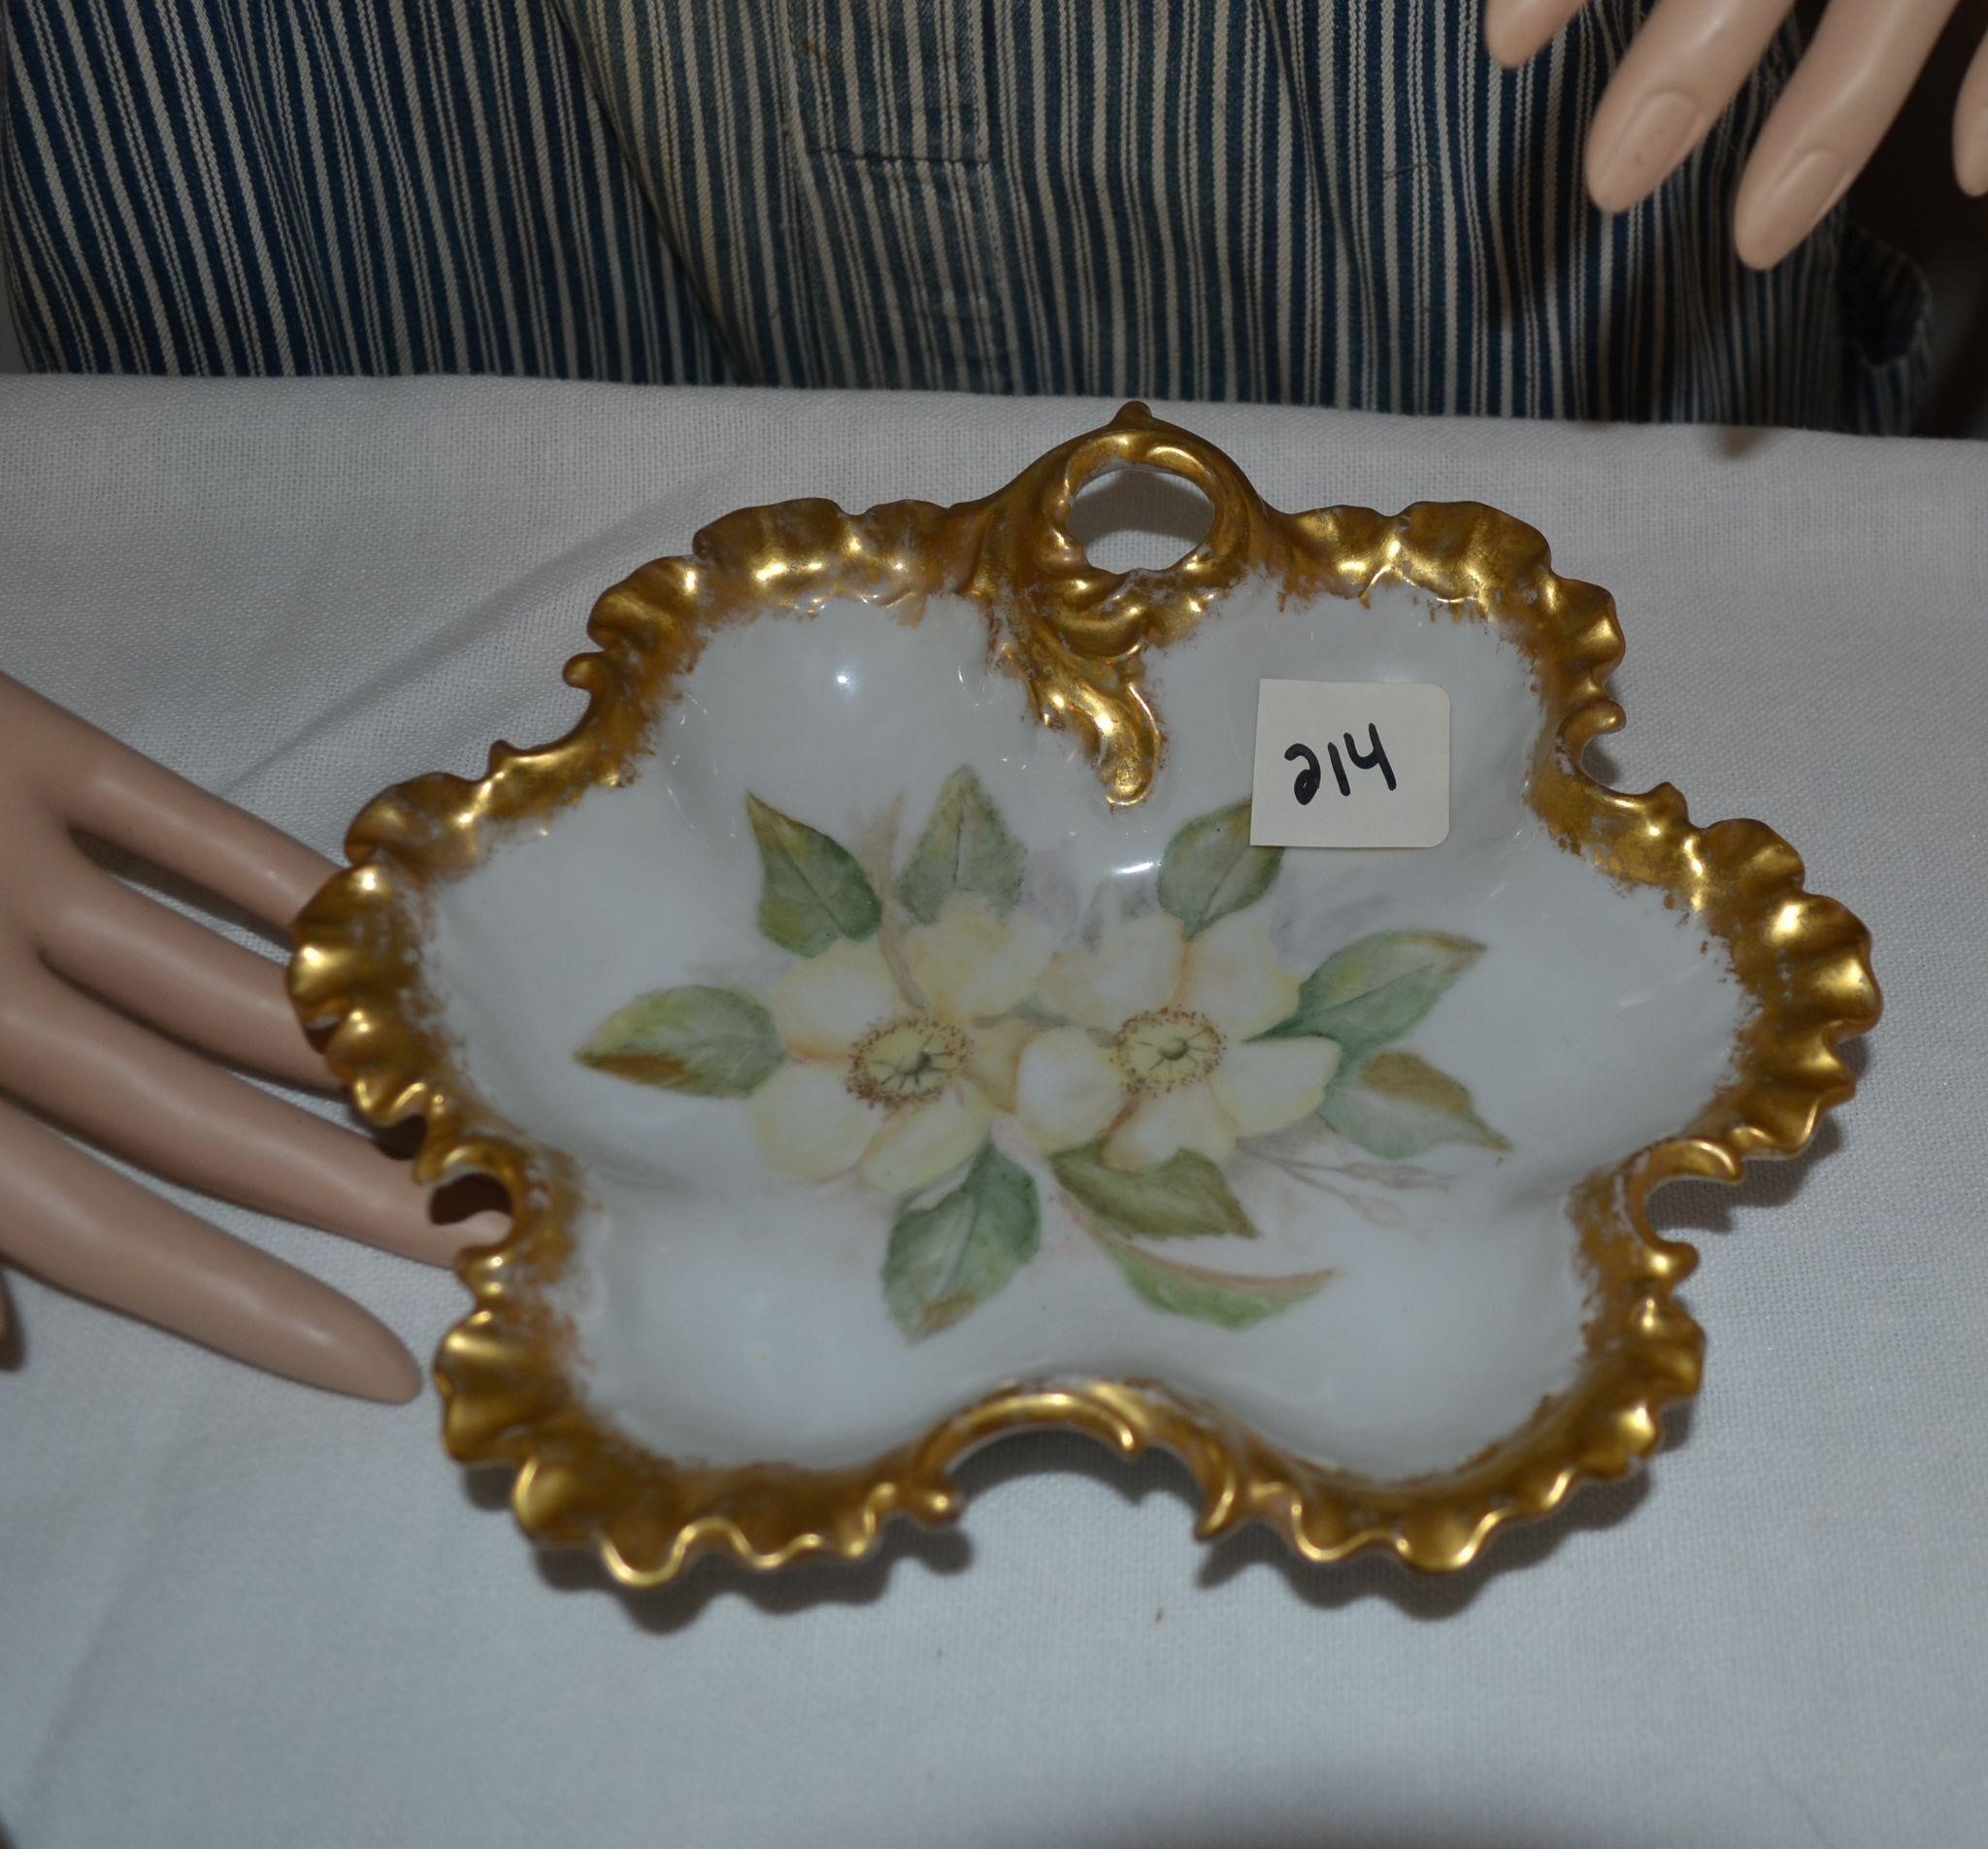 Gold rimmed decorative plate